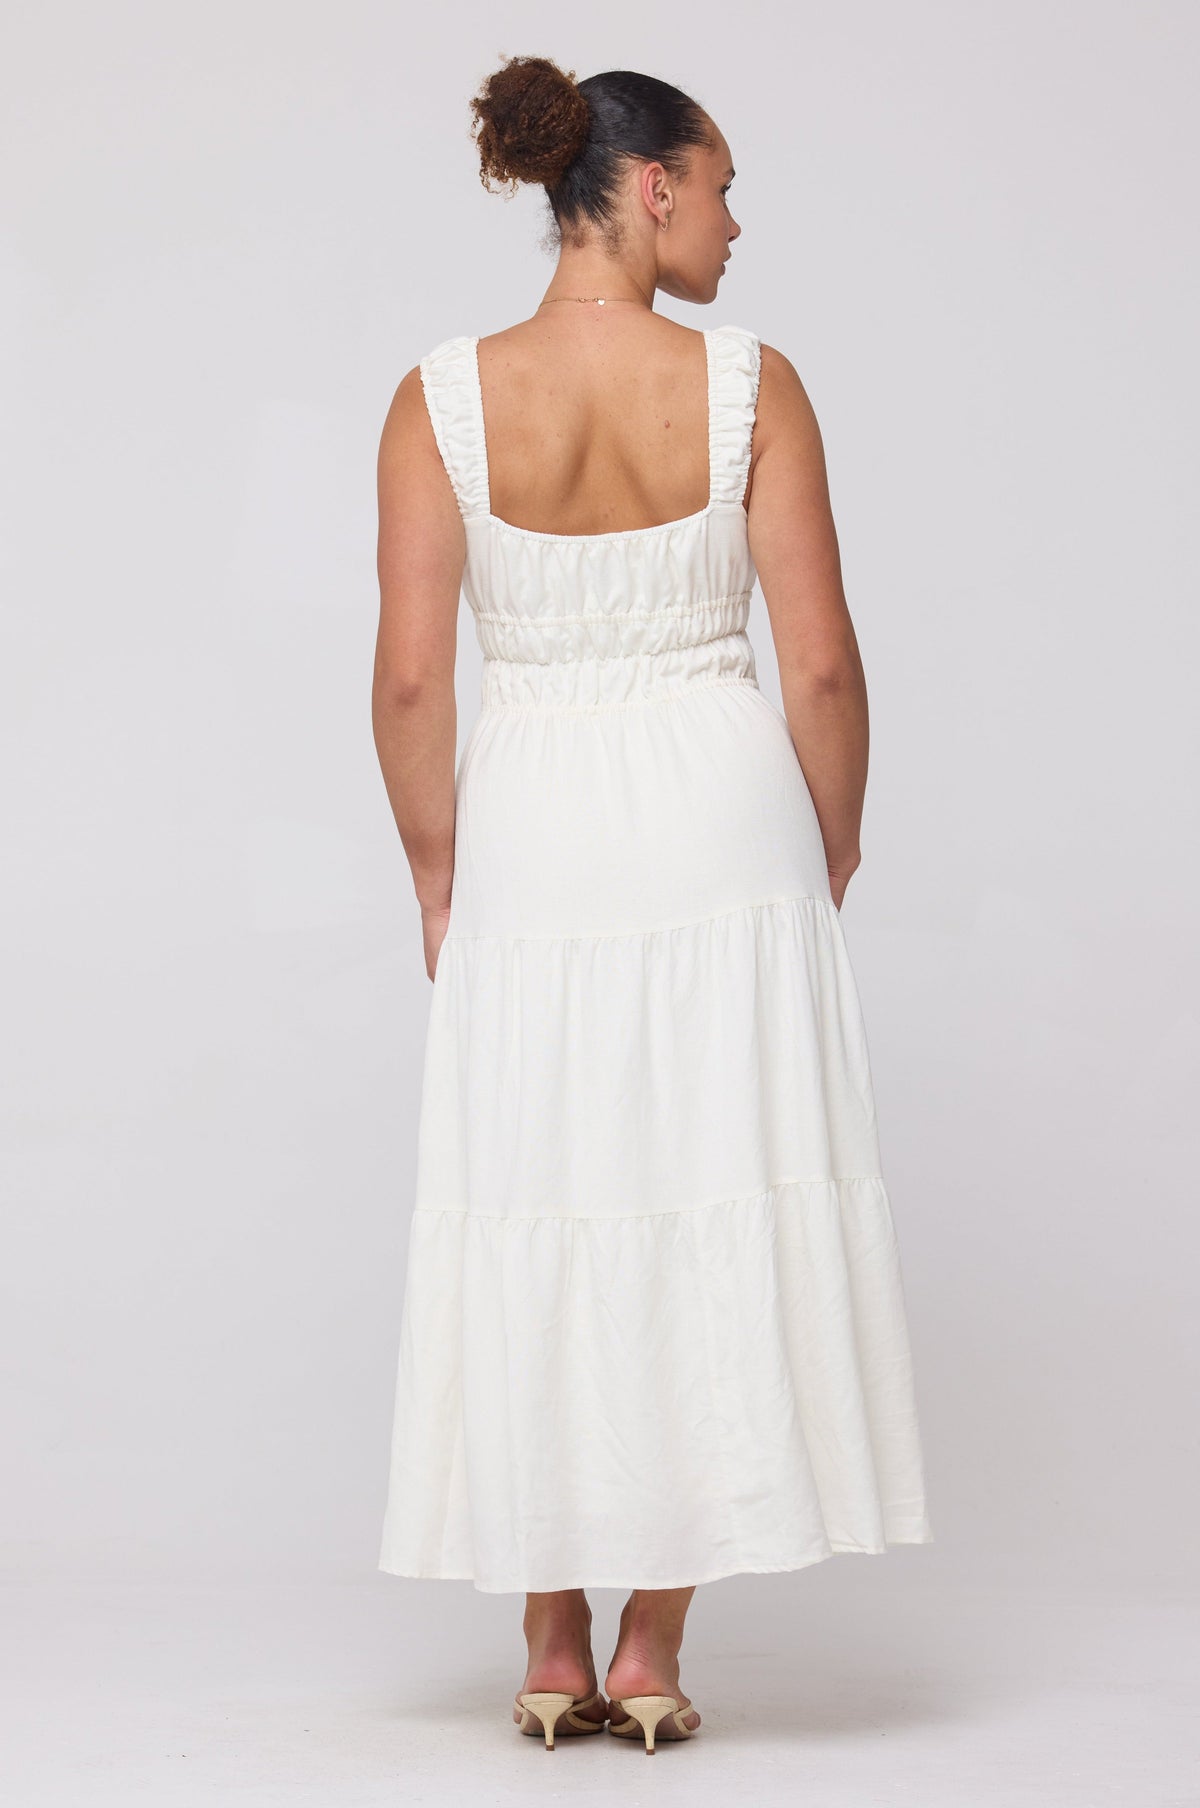 This is an image of Tori Dress in White Linen - RESA featuring a model wearing the dress